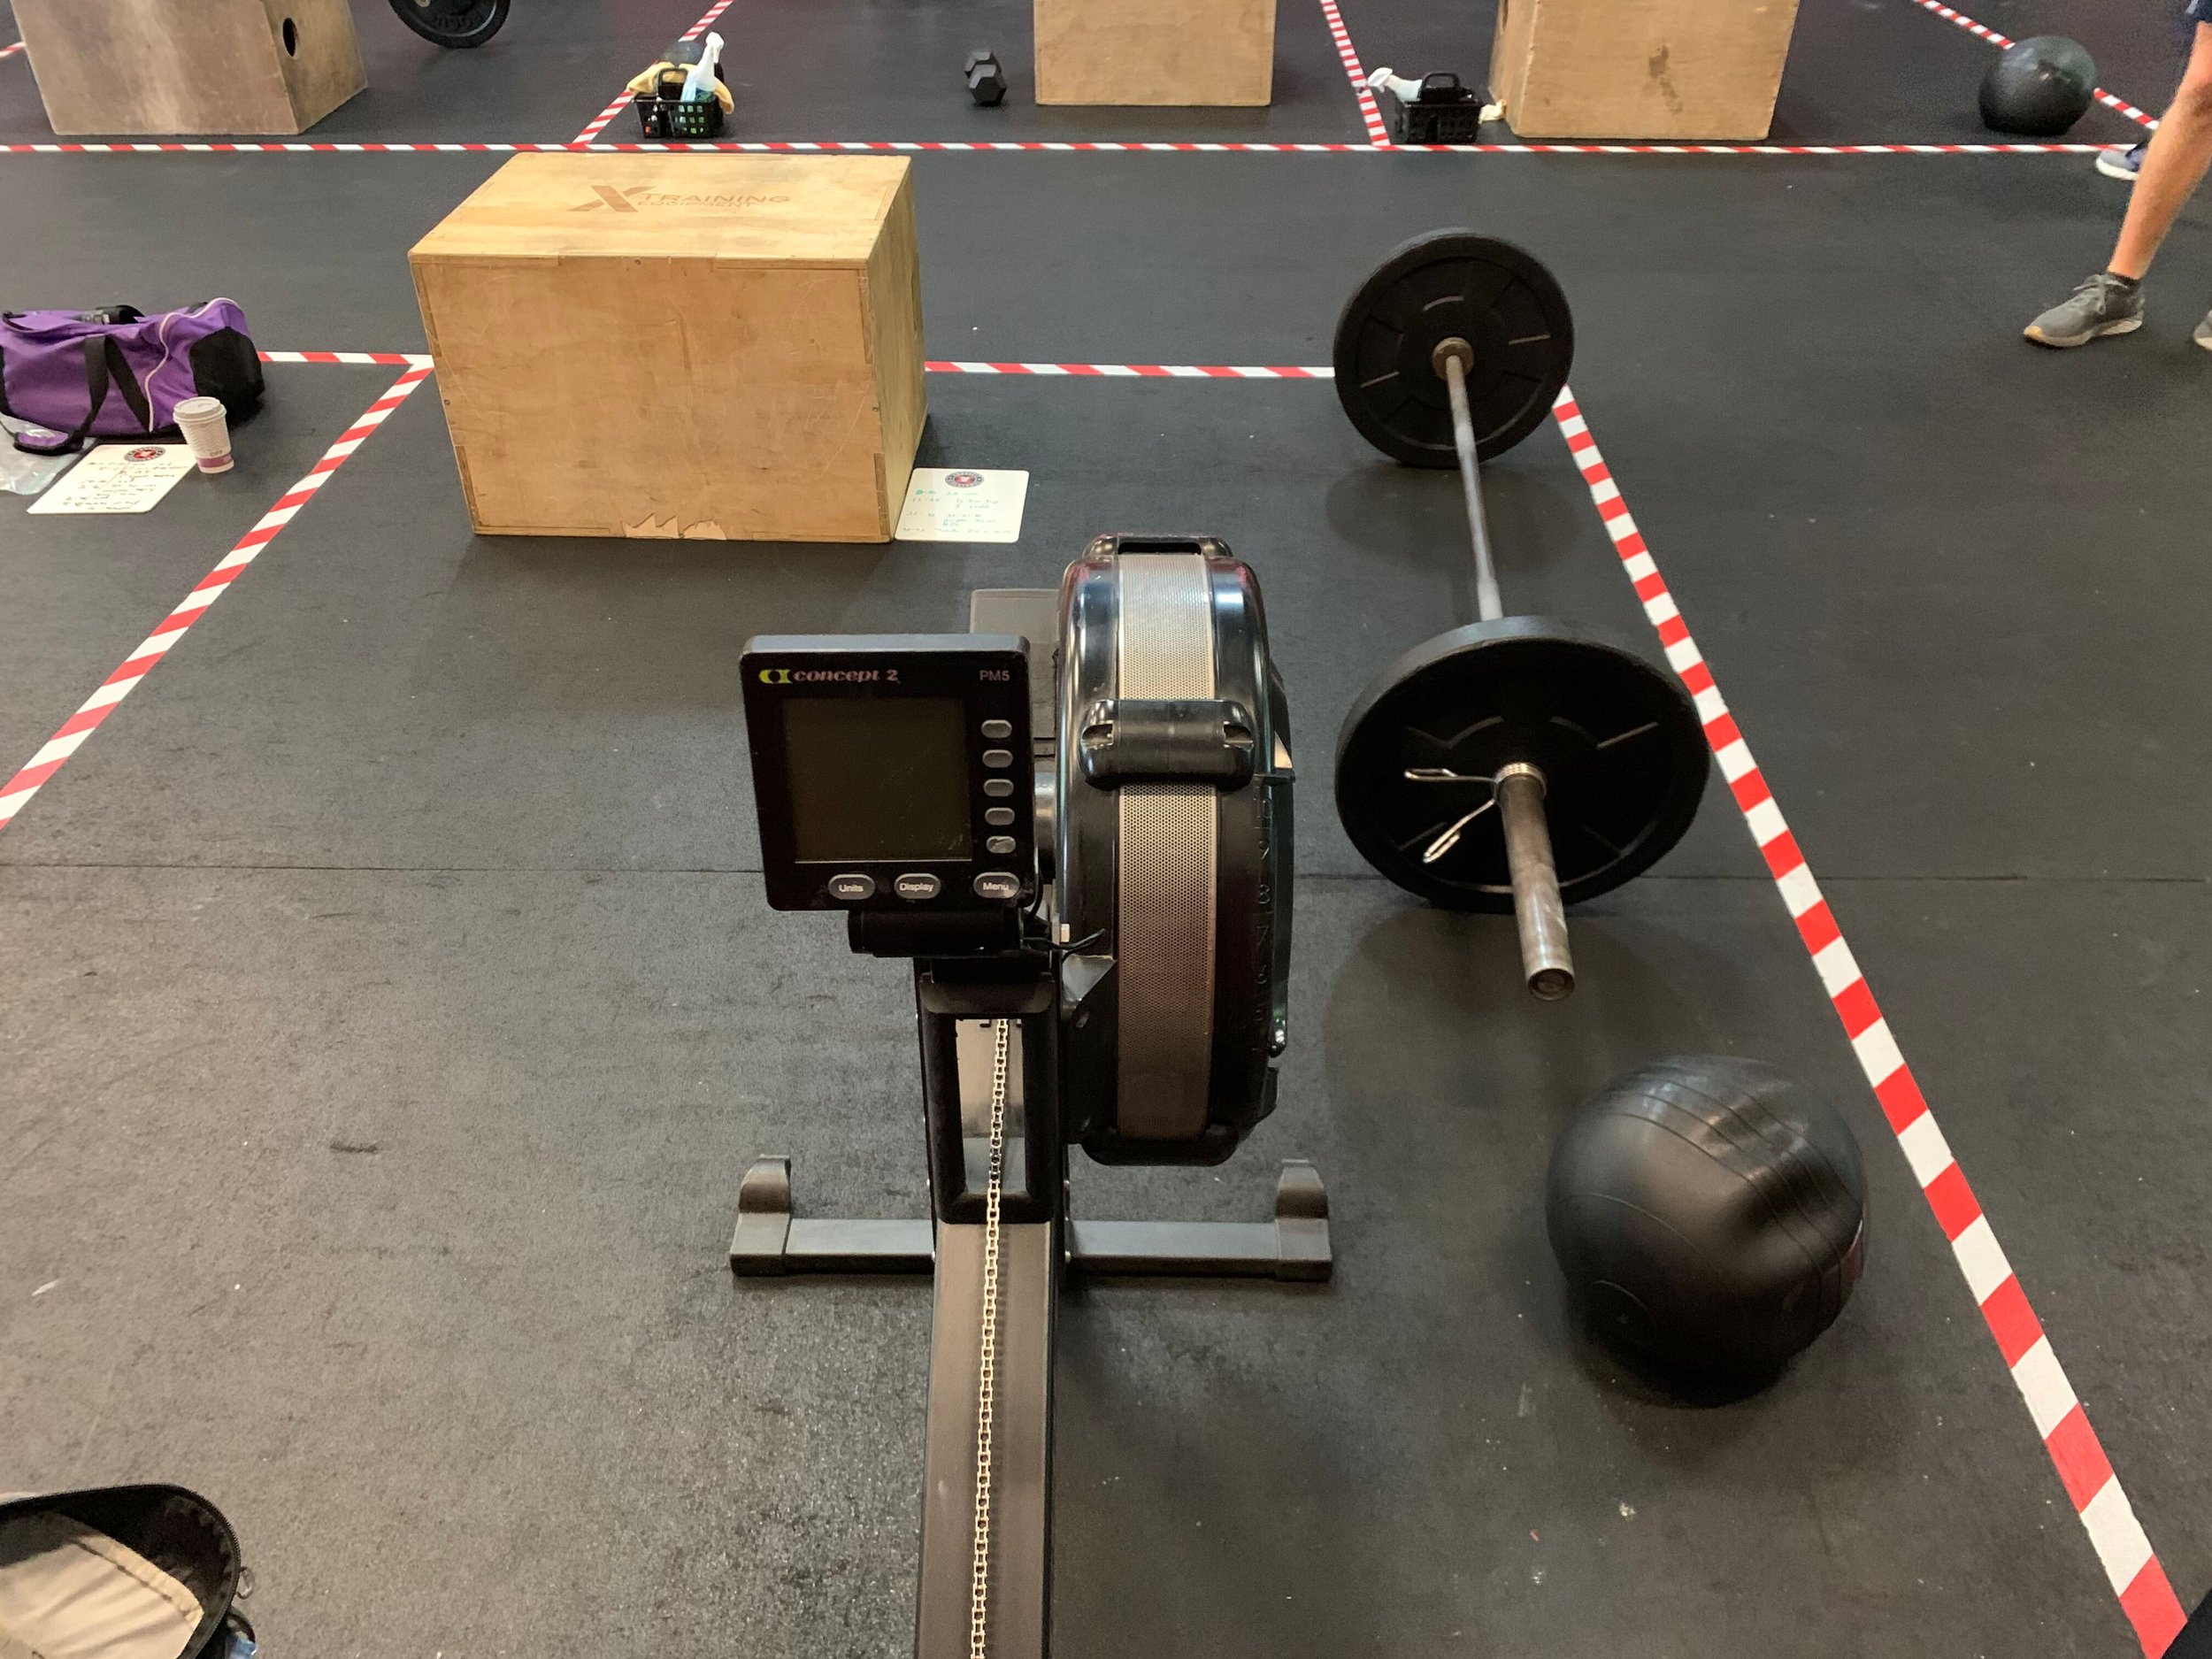  “This is the setup for the last Crossfit workout I did before the long covid kicked in too hard to be able to continue.&nbsp; A few days later I go out to Shenandoah and then that's the last physical activity for quite a while.” - Michael Herrera 